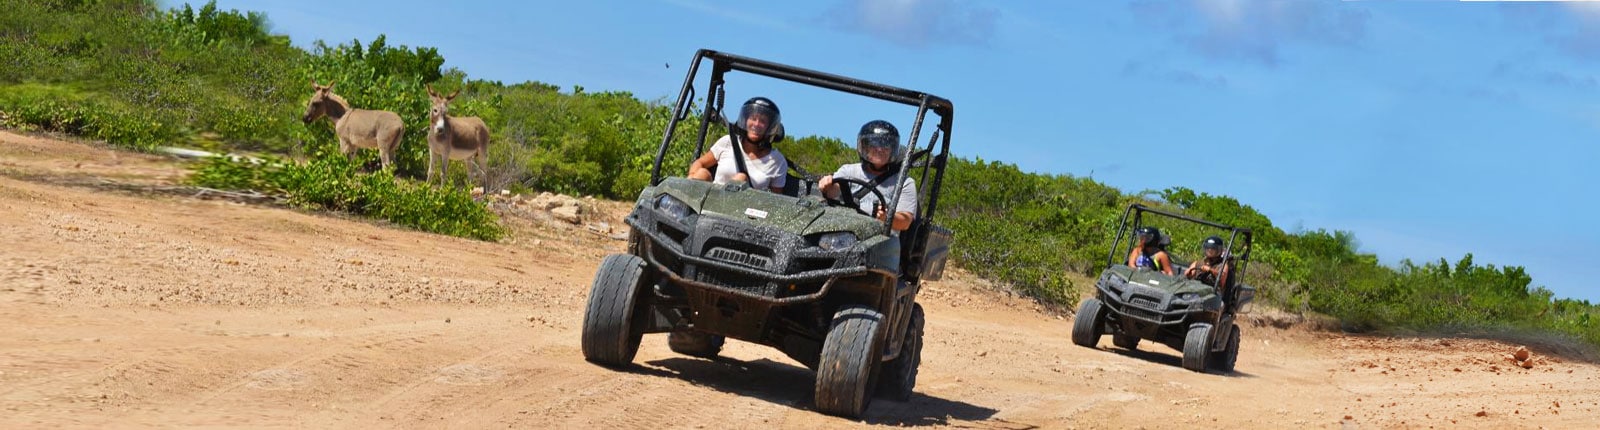 Riding a buggy on the trail in Amber Cove, Puerto Plata, Dominican Republic